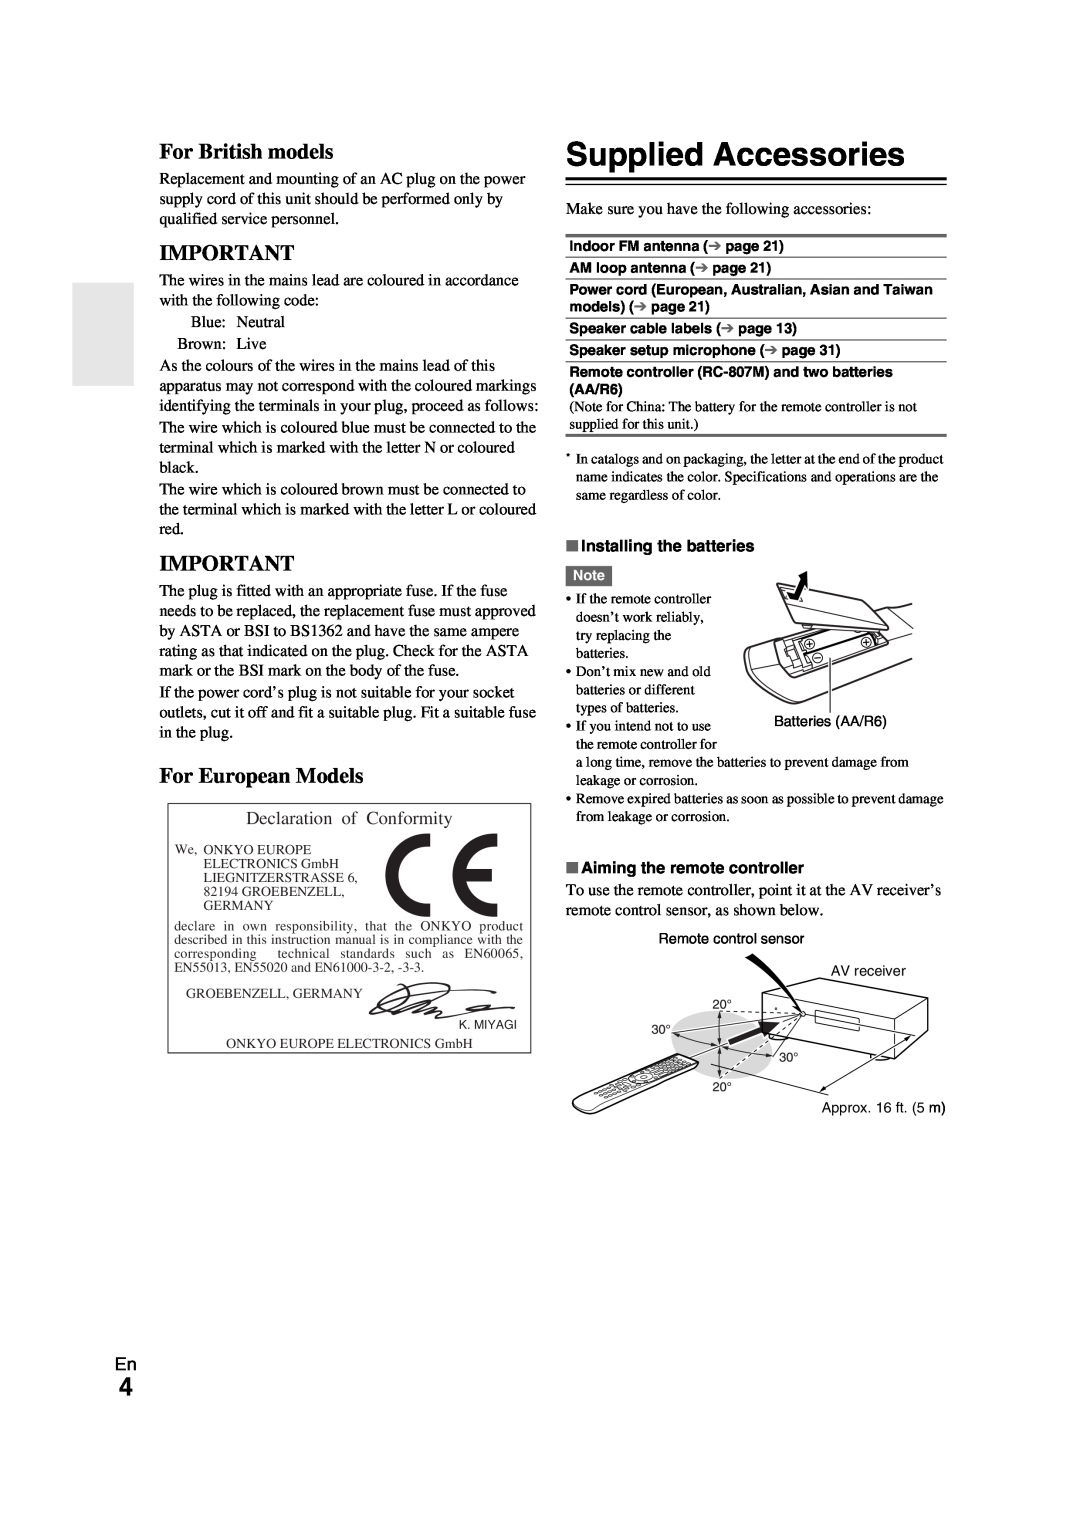 Onkyo TX-NR709 instruction manual Supplied Accessories, For British models, For European Models, Declaration of Conformity 